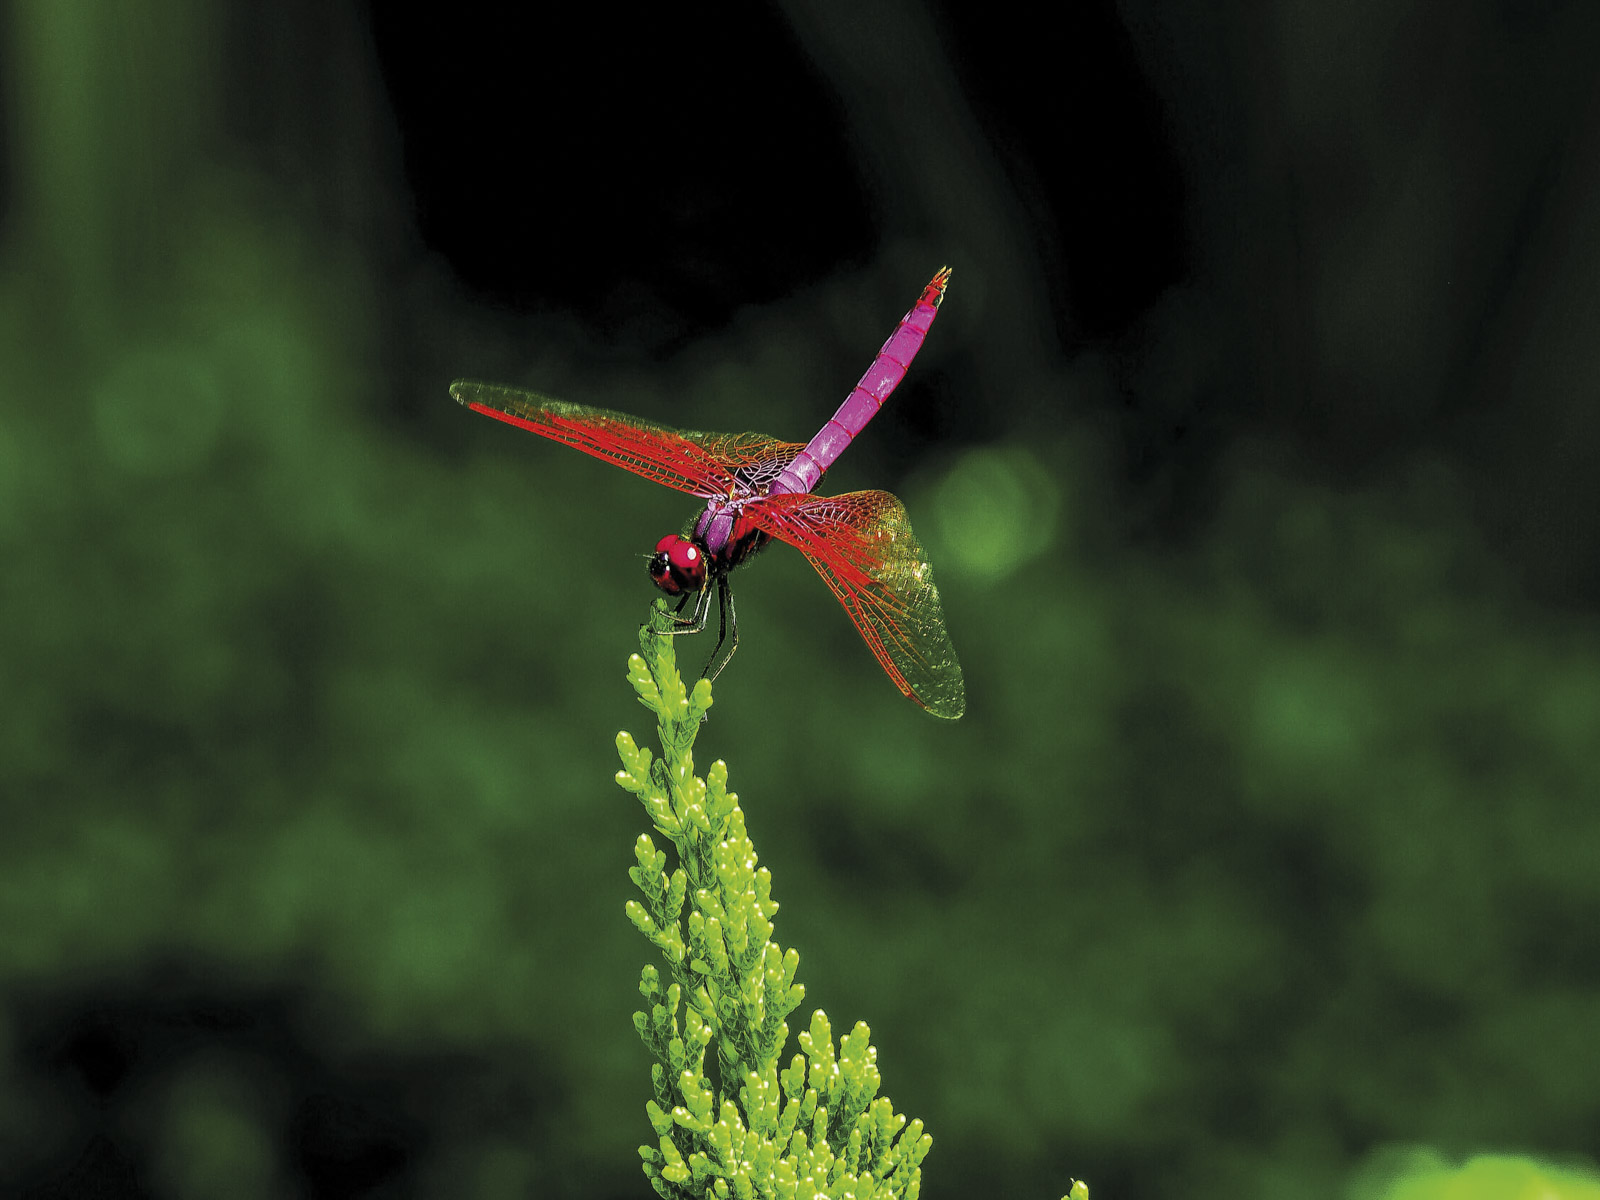 Pink dragonfly on plant, Hong Kong country parks